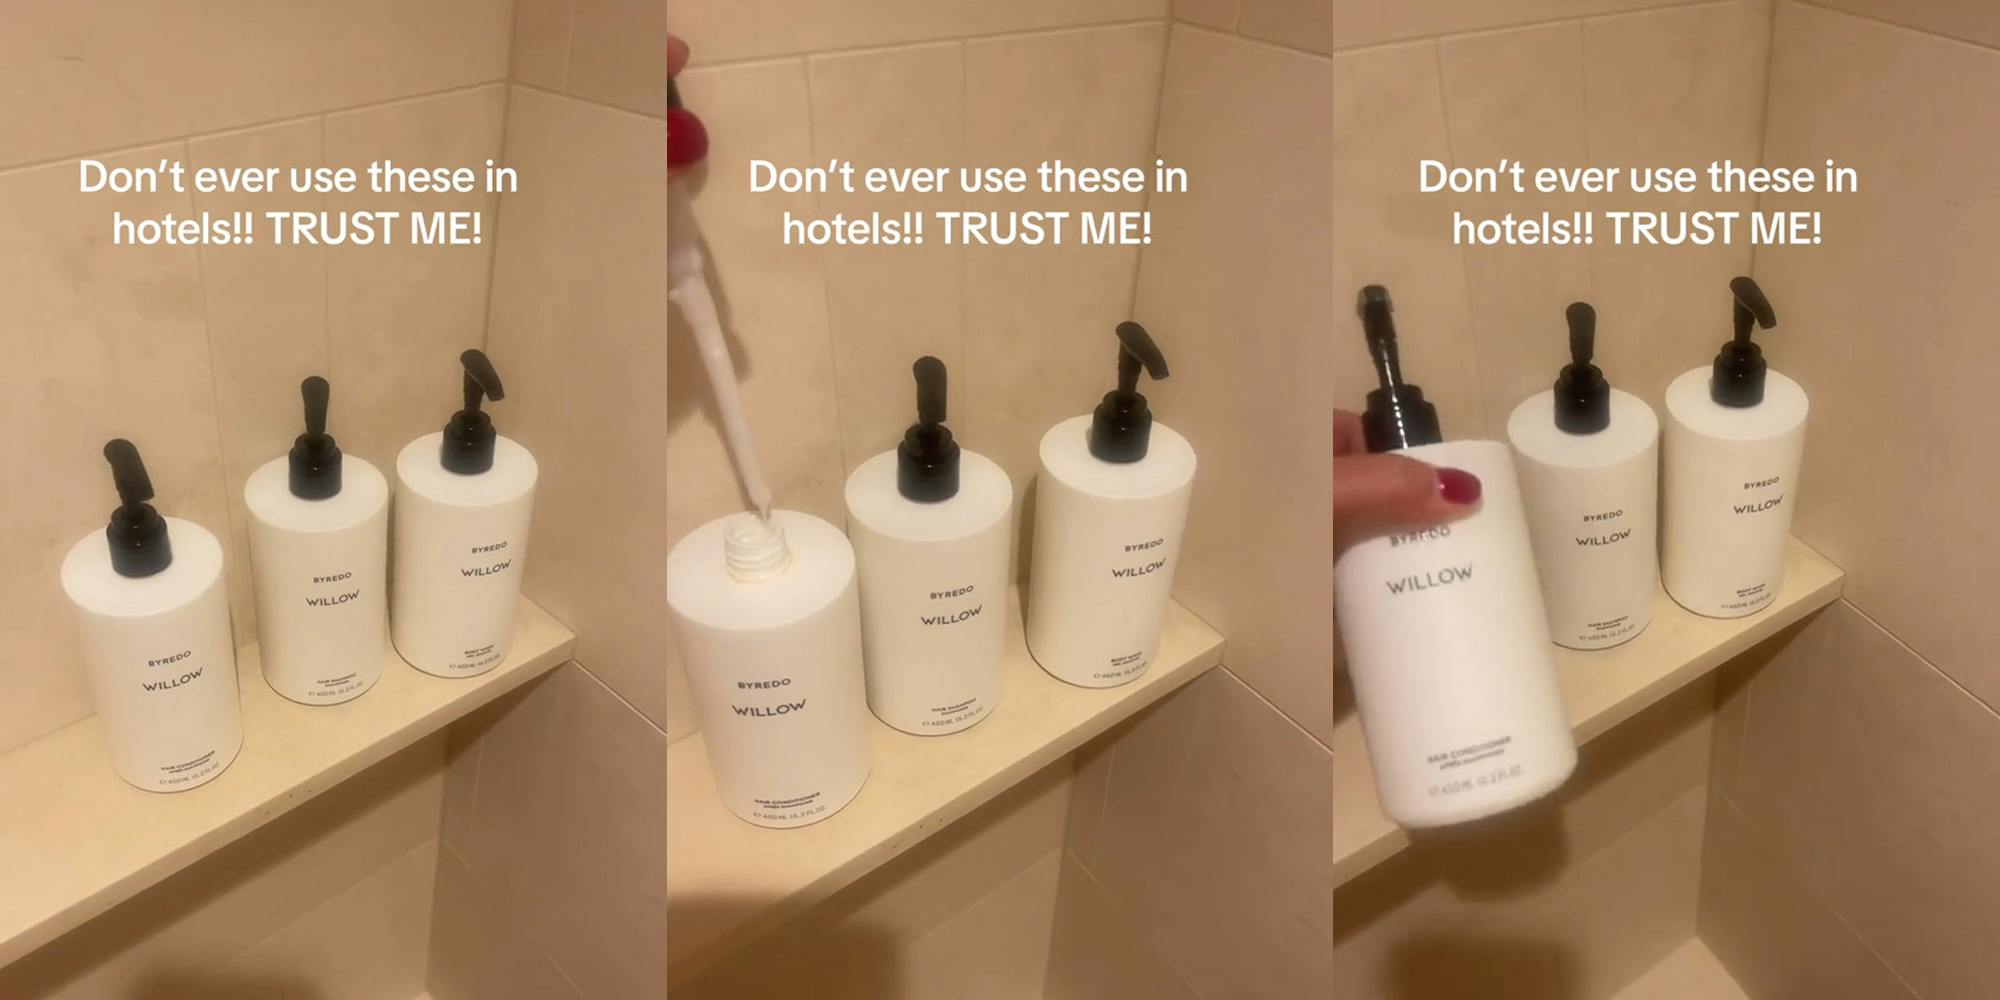 hotel bathroom with body wash shampoo and conditioner bottle with caption "Don't ever use these in hotels!! TRUST ME!" (l) guest opening hotel bathroom with body wash shampoo and conditioner bottle with caption "Don't ever use these in hotels!! TRUST ME!" (c) guest holding hotel bathroom with body wash shampoo and conditioner bottle with caption "Don't ever use these in hotels!! TRUST ME!" (r)